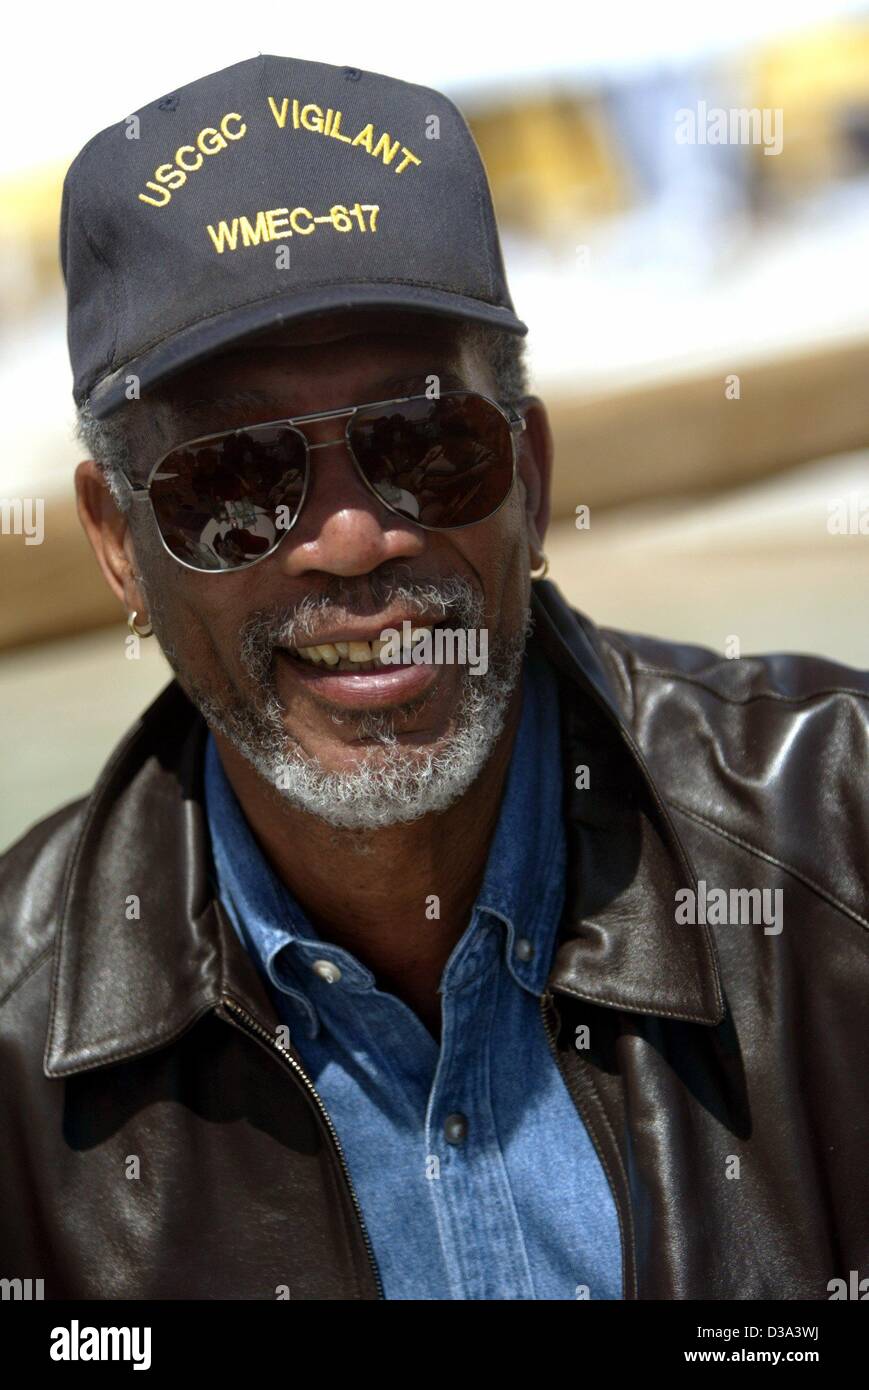 (dpa) - American actor Morgan Freeman, pictured at the 55th Film Festival in Cannes, May 2002. 'Driving Miss Daisy', 'Glory', 'Along came a Spider' and 'Seven' are some of the famous movies Freeman starred in. Stock Photo